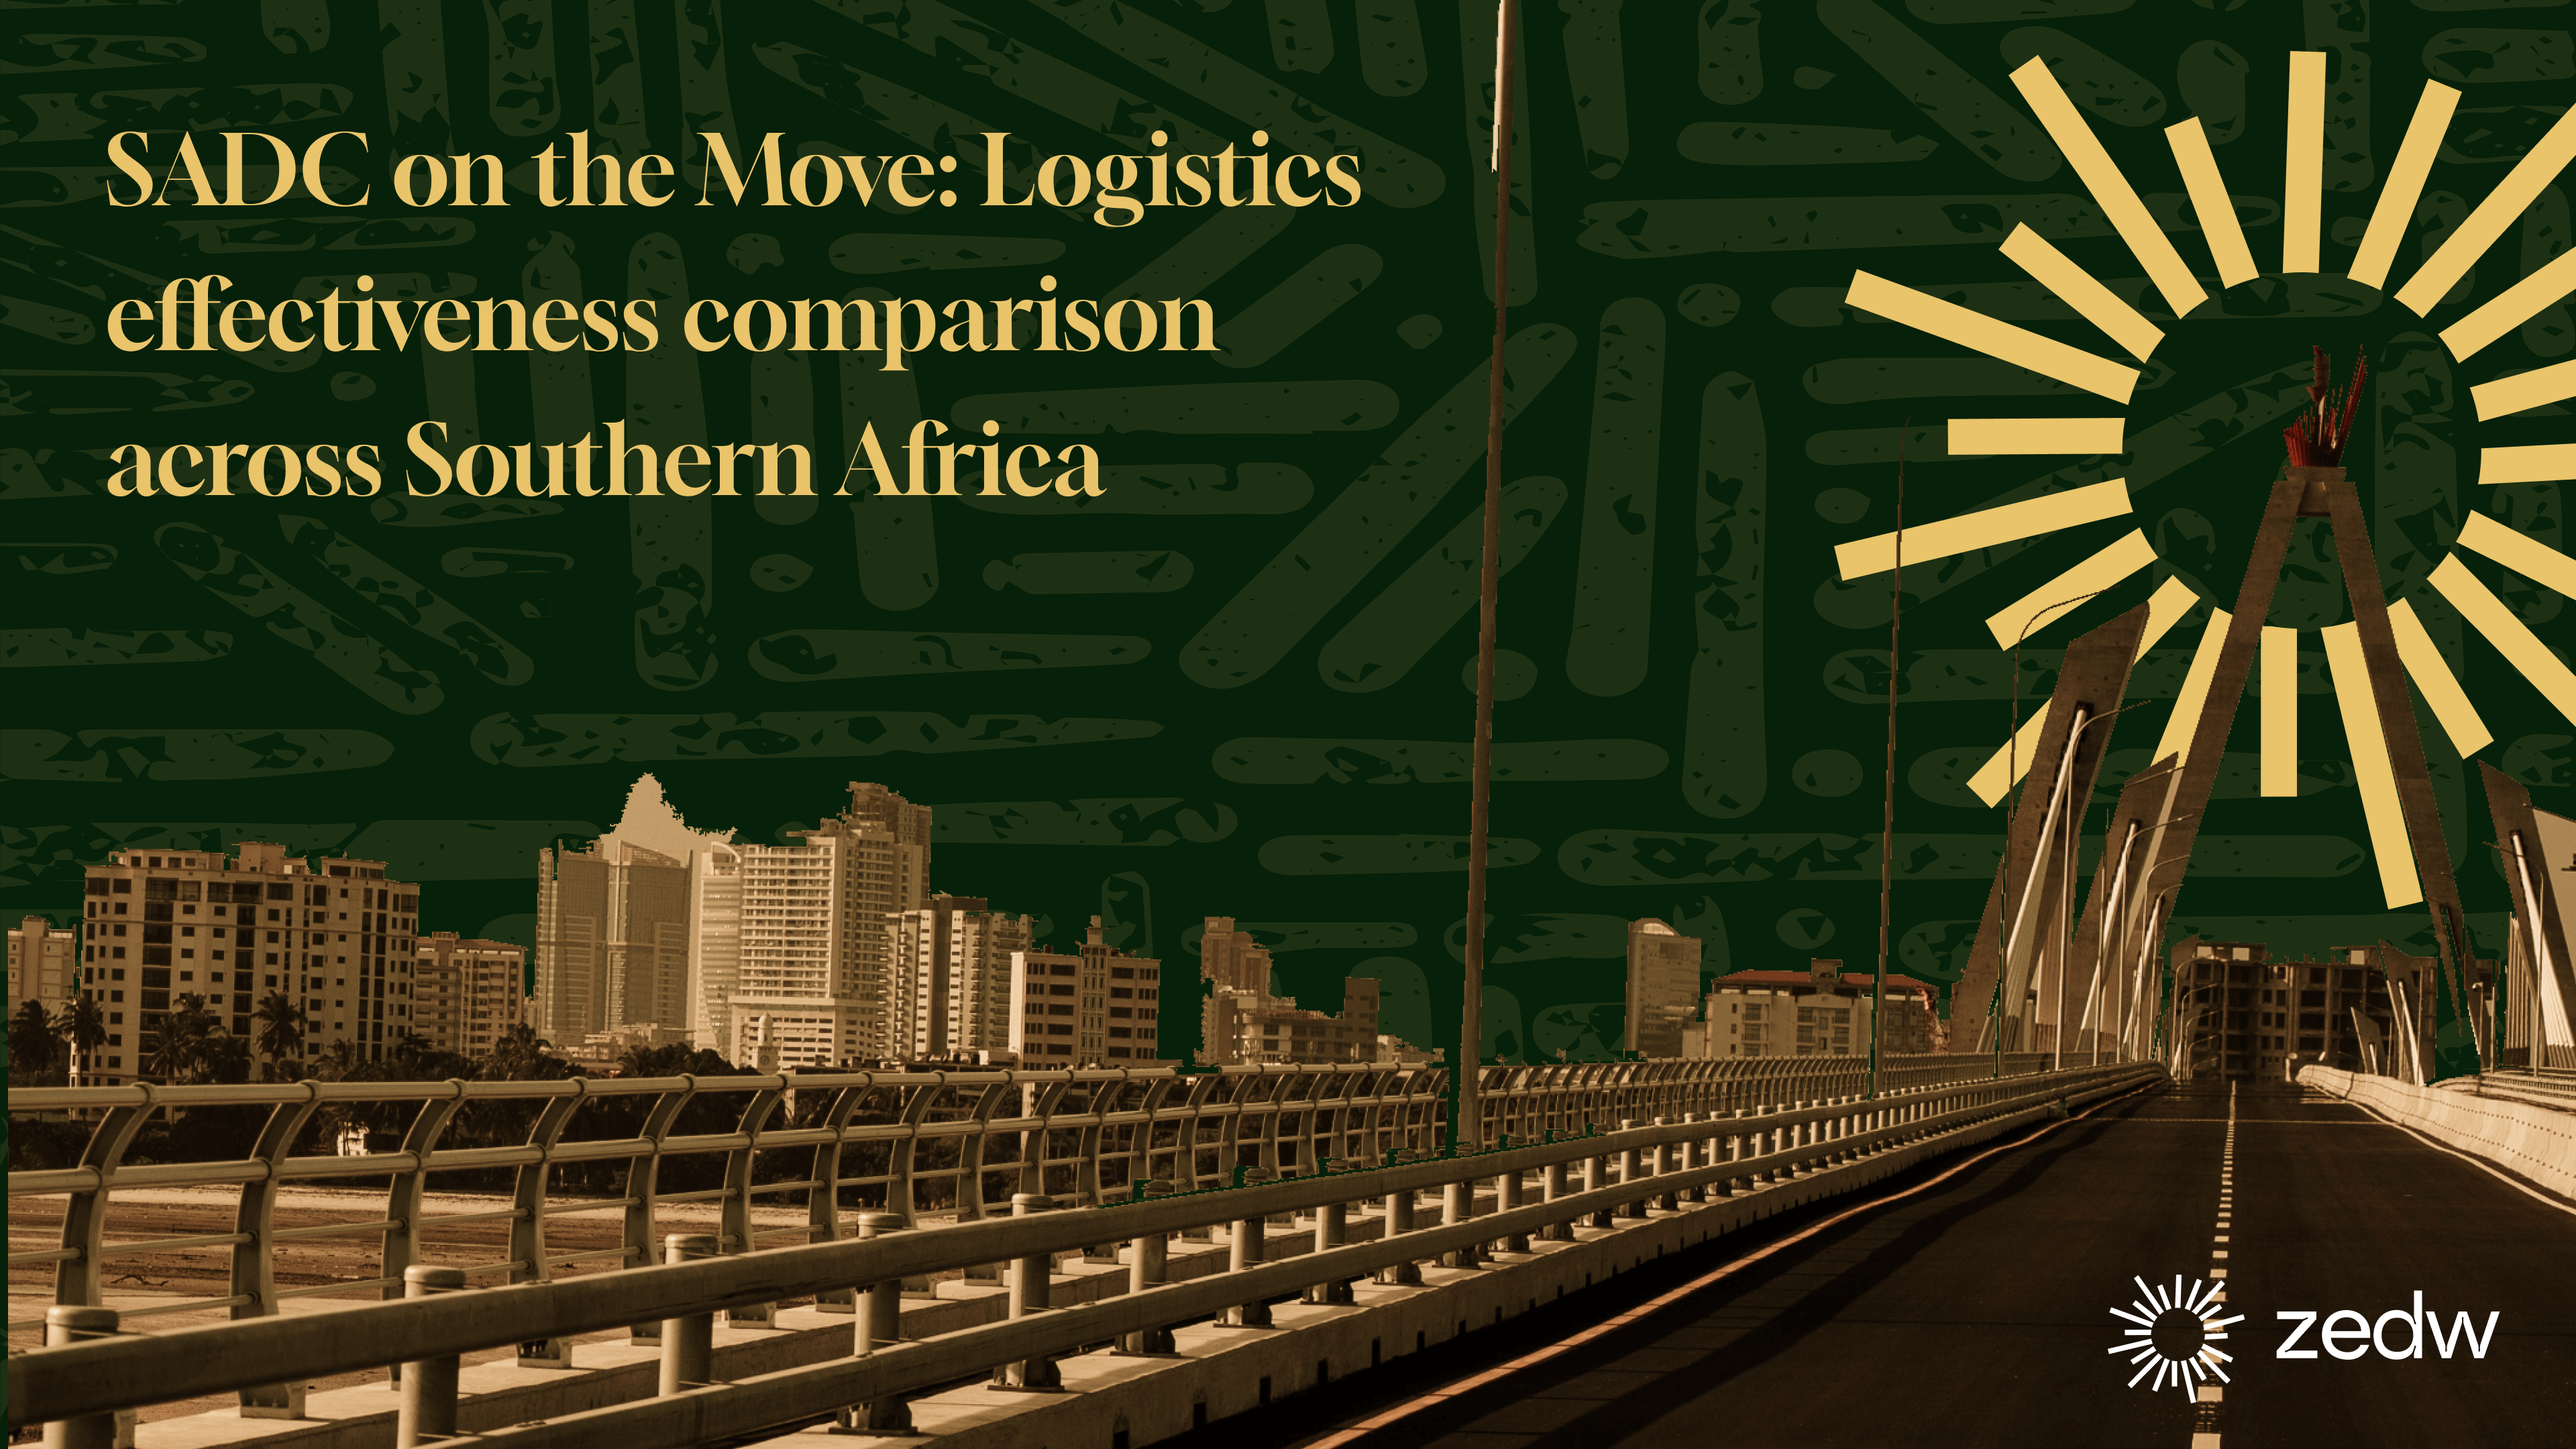 SADC on the Move: Logistics capacity comparison across Southern Africa